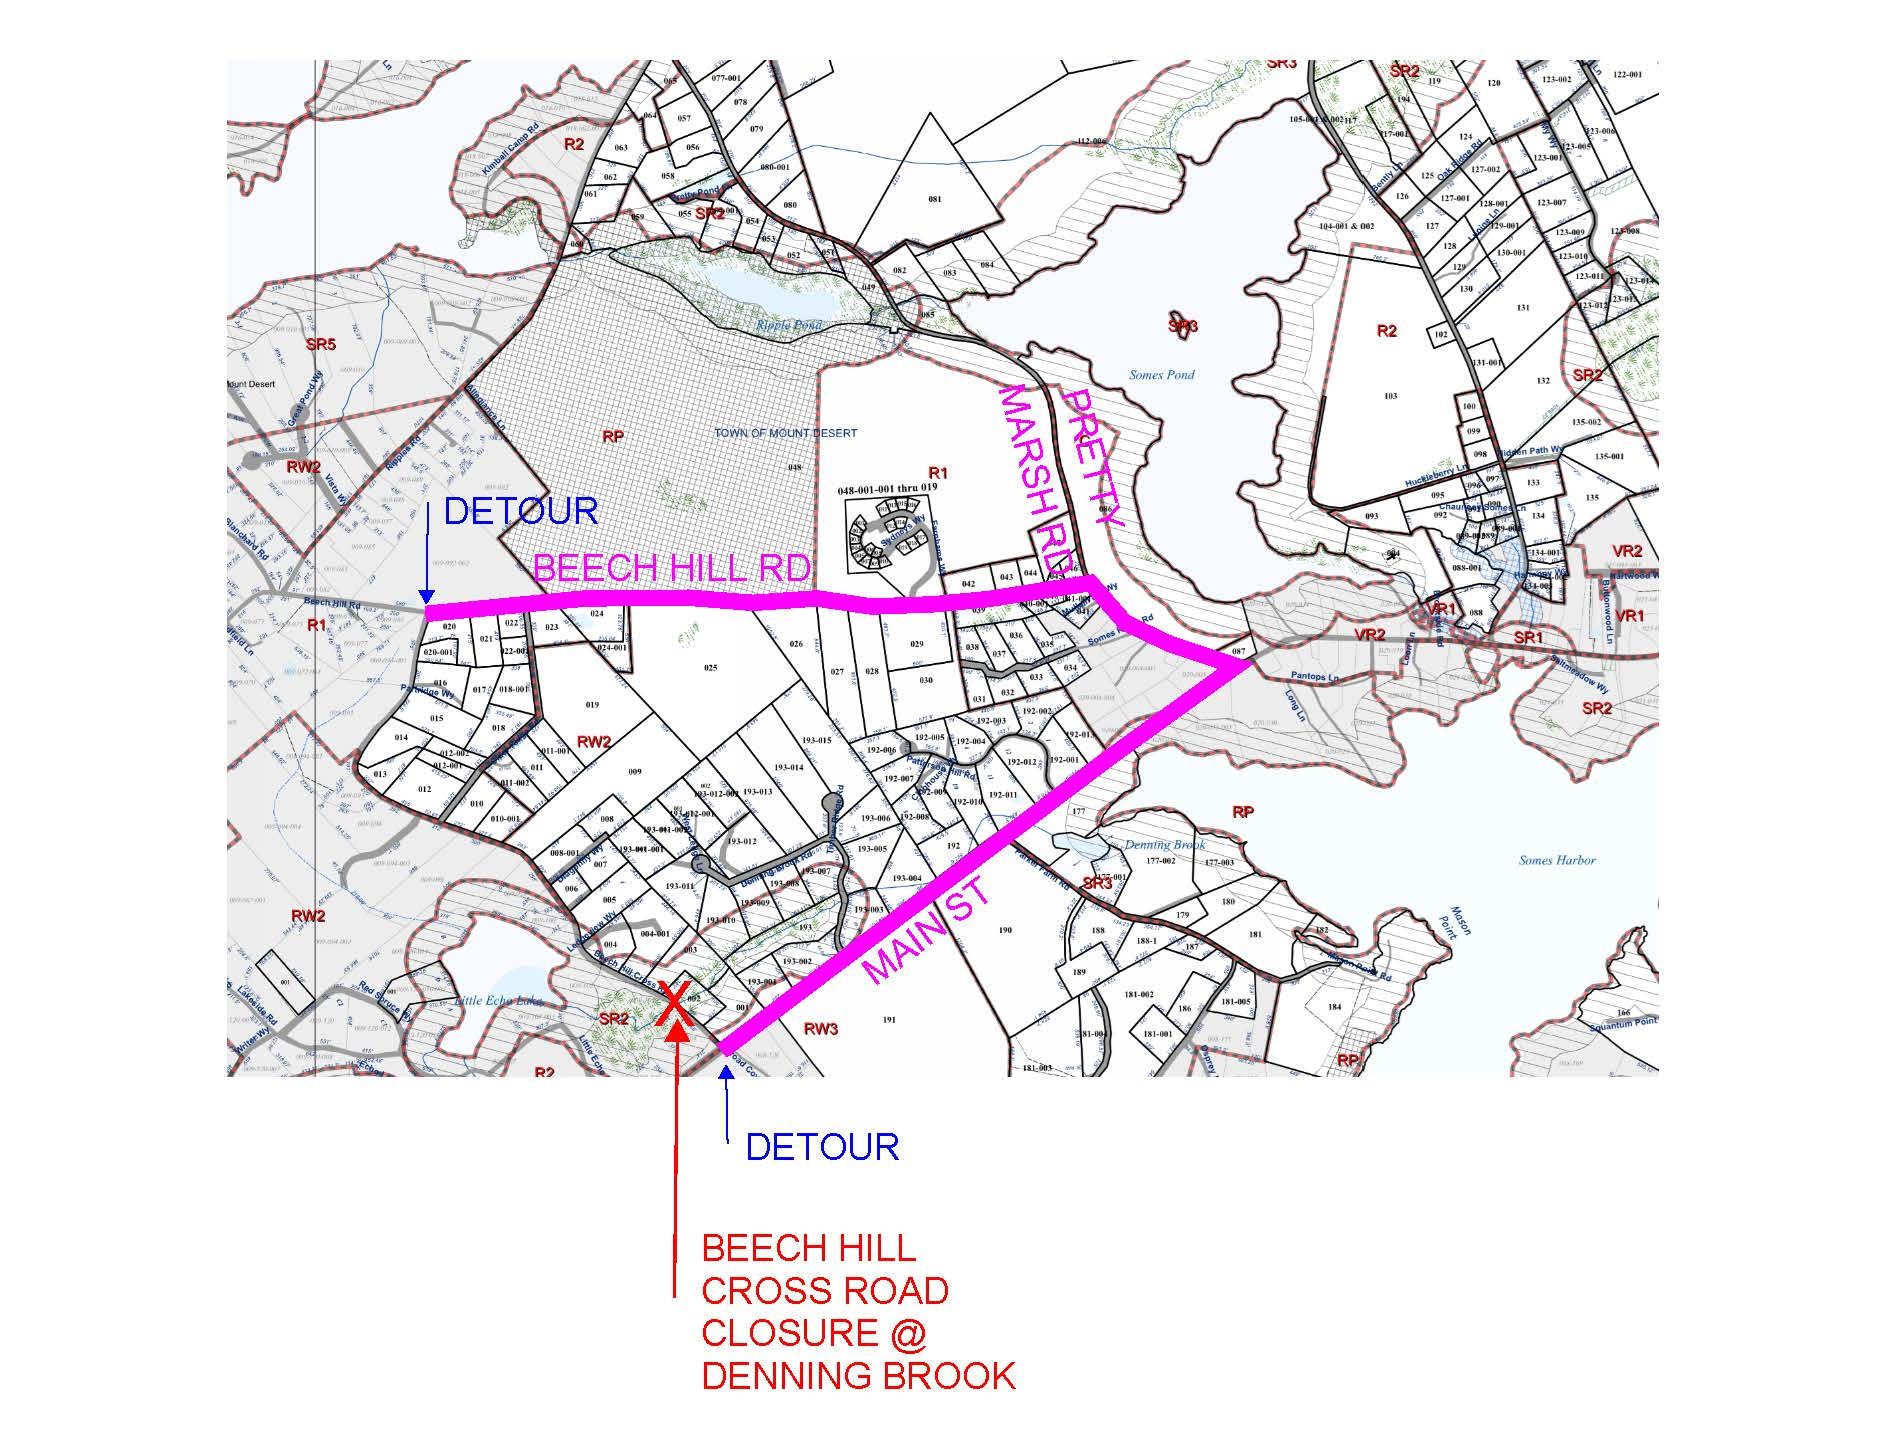 Beech Hill Road Closure and Detour Information